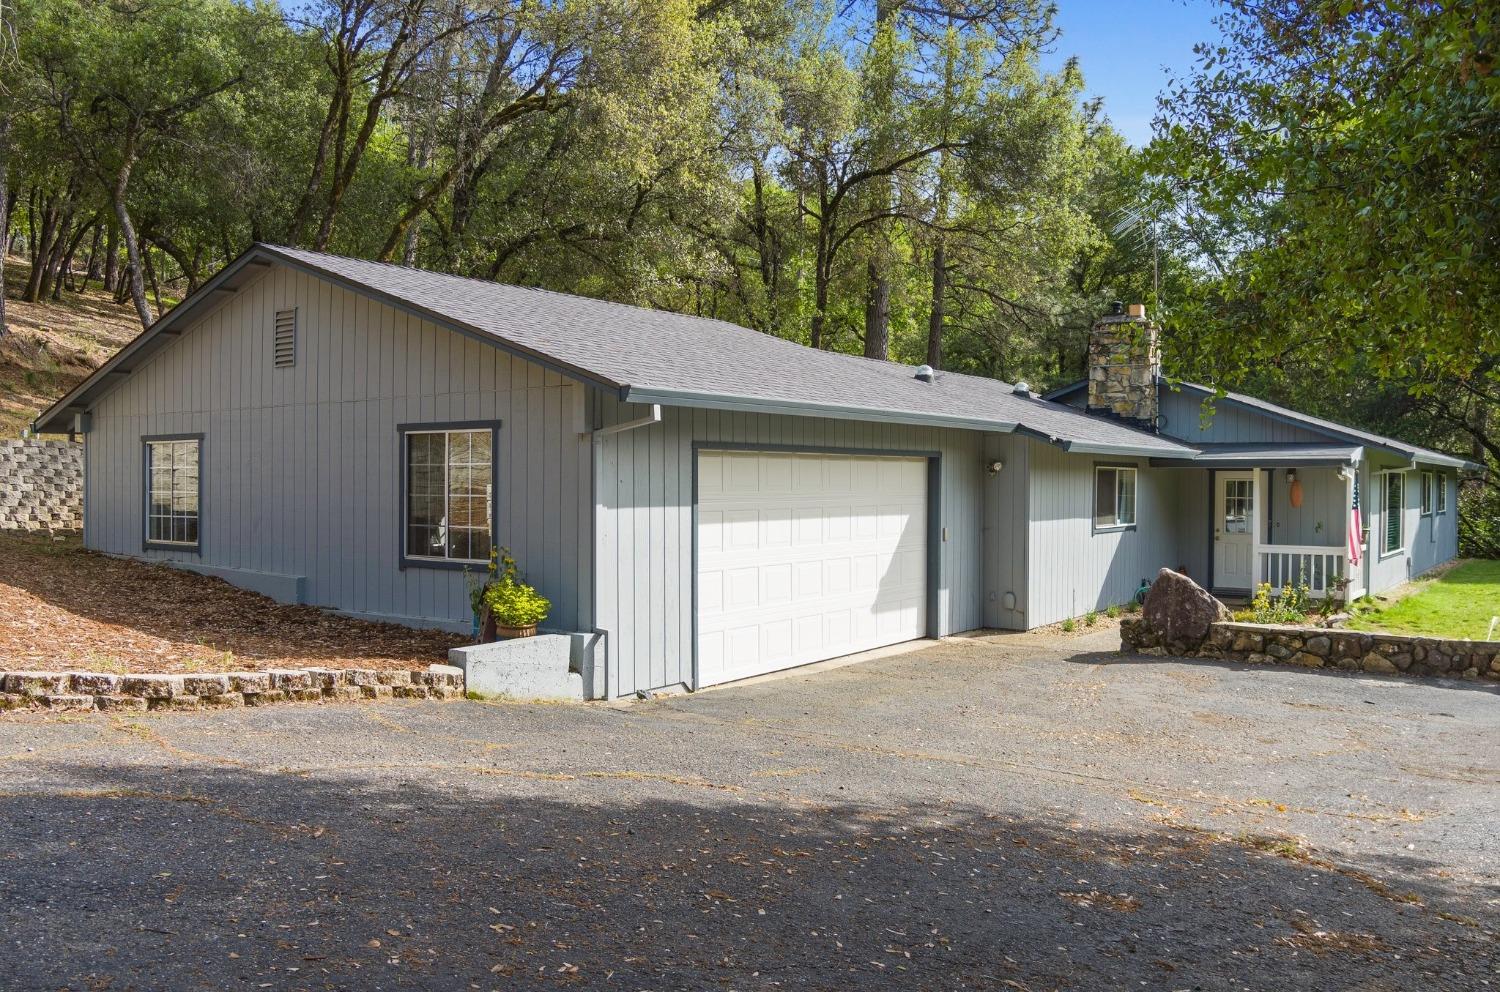 Photo of 3855 Nugget Ln in Placerville, CA